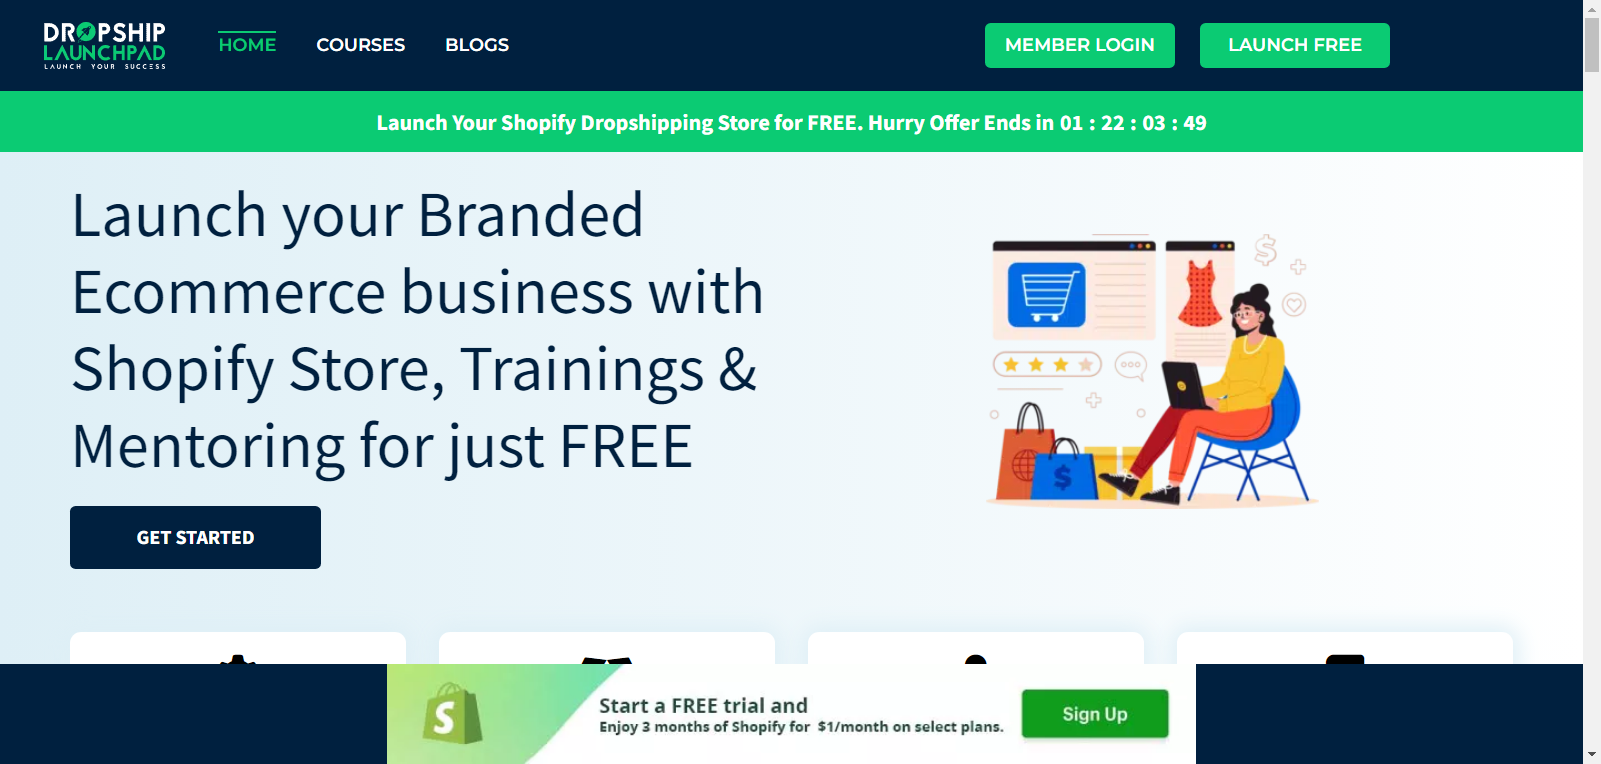 Dropship Launchpad: Features of a Cheap Shopify Store